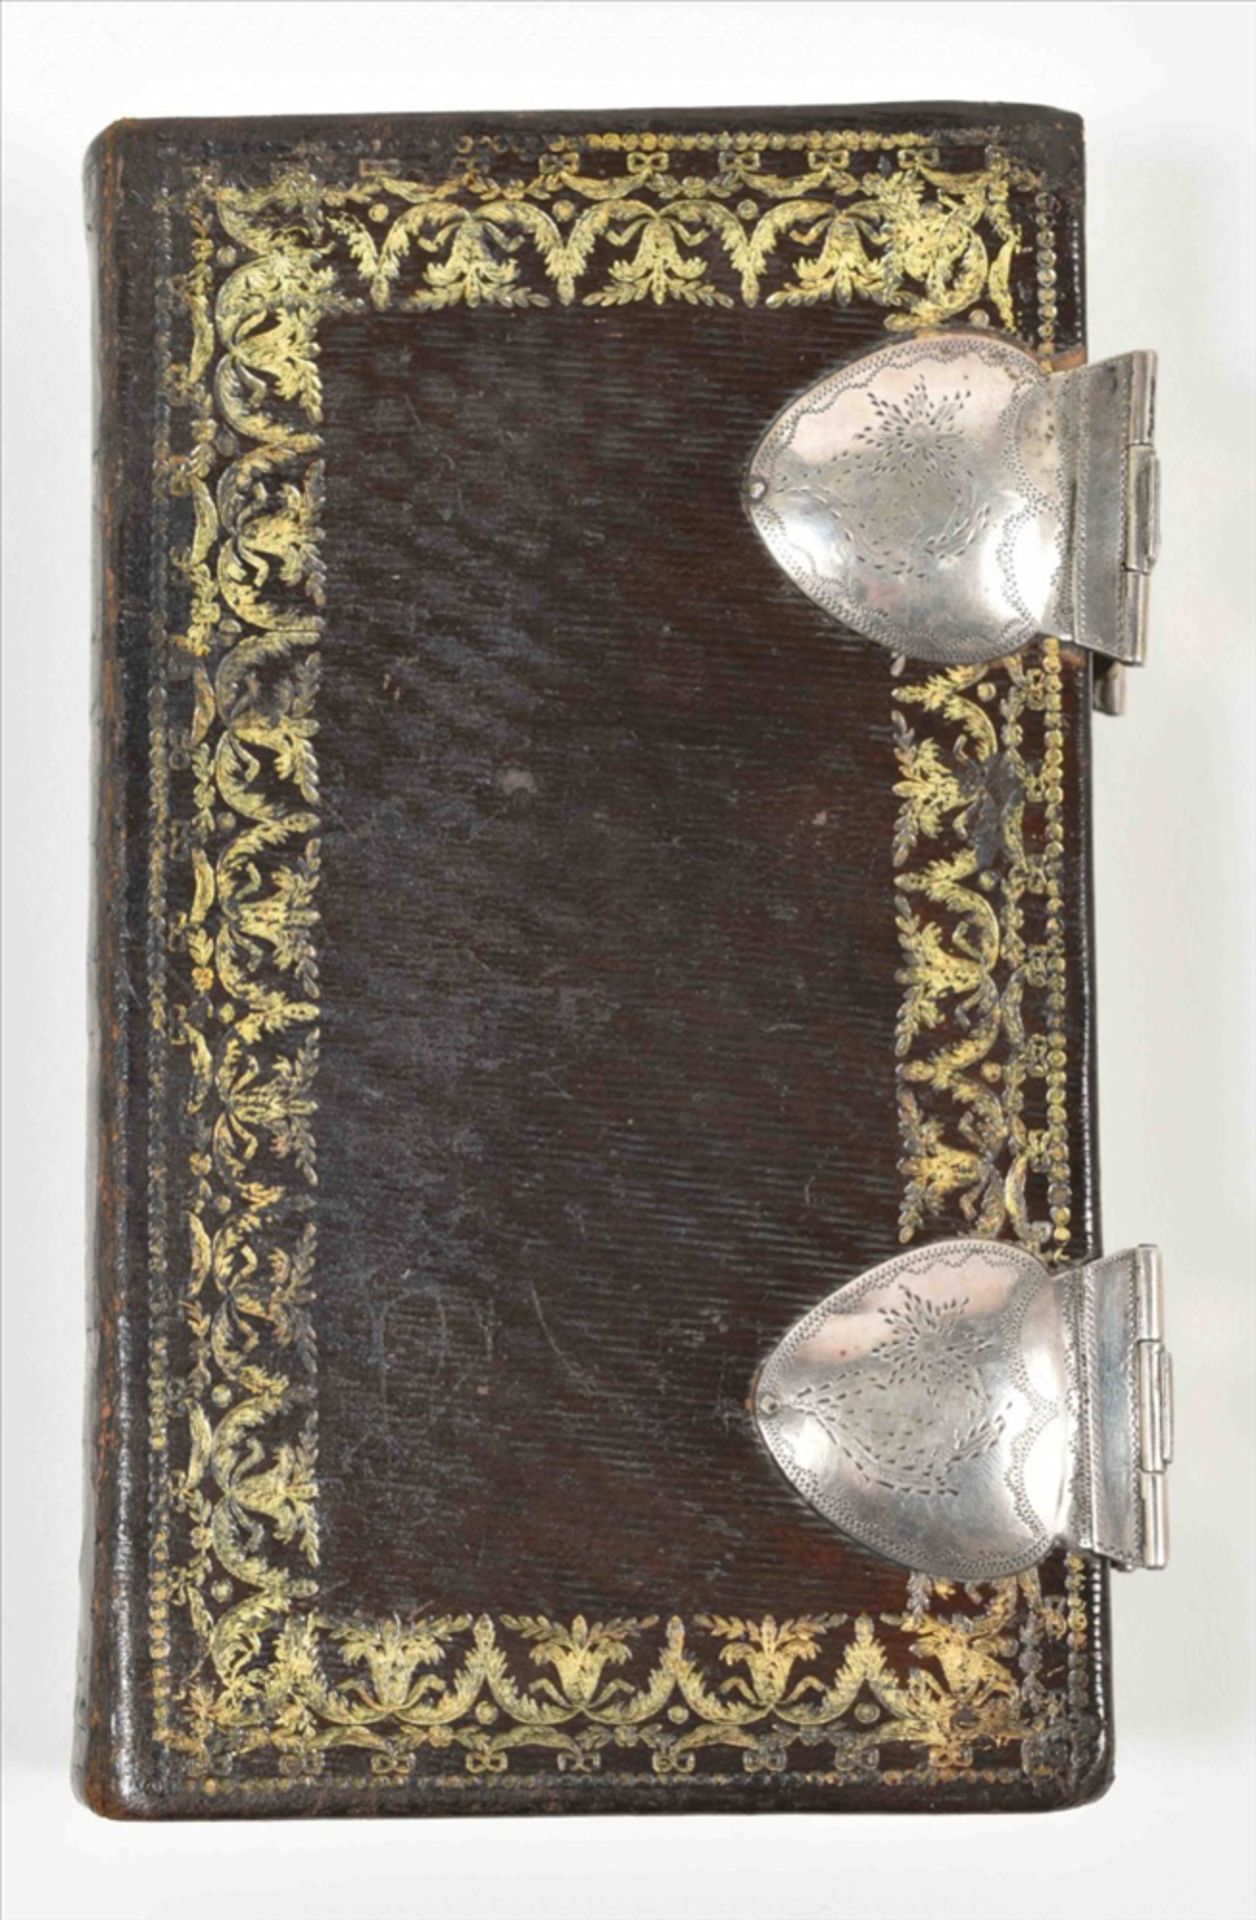 [Bindings] Early 19th century brown leather binding with two silver clasps and catches - Image 10 of 10